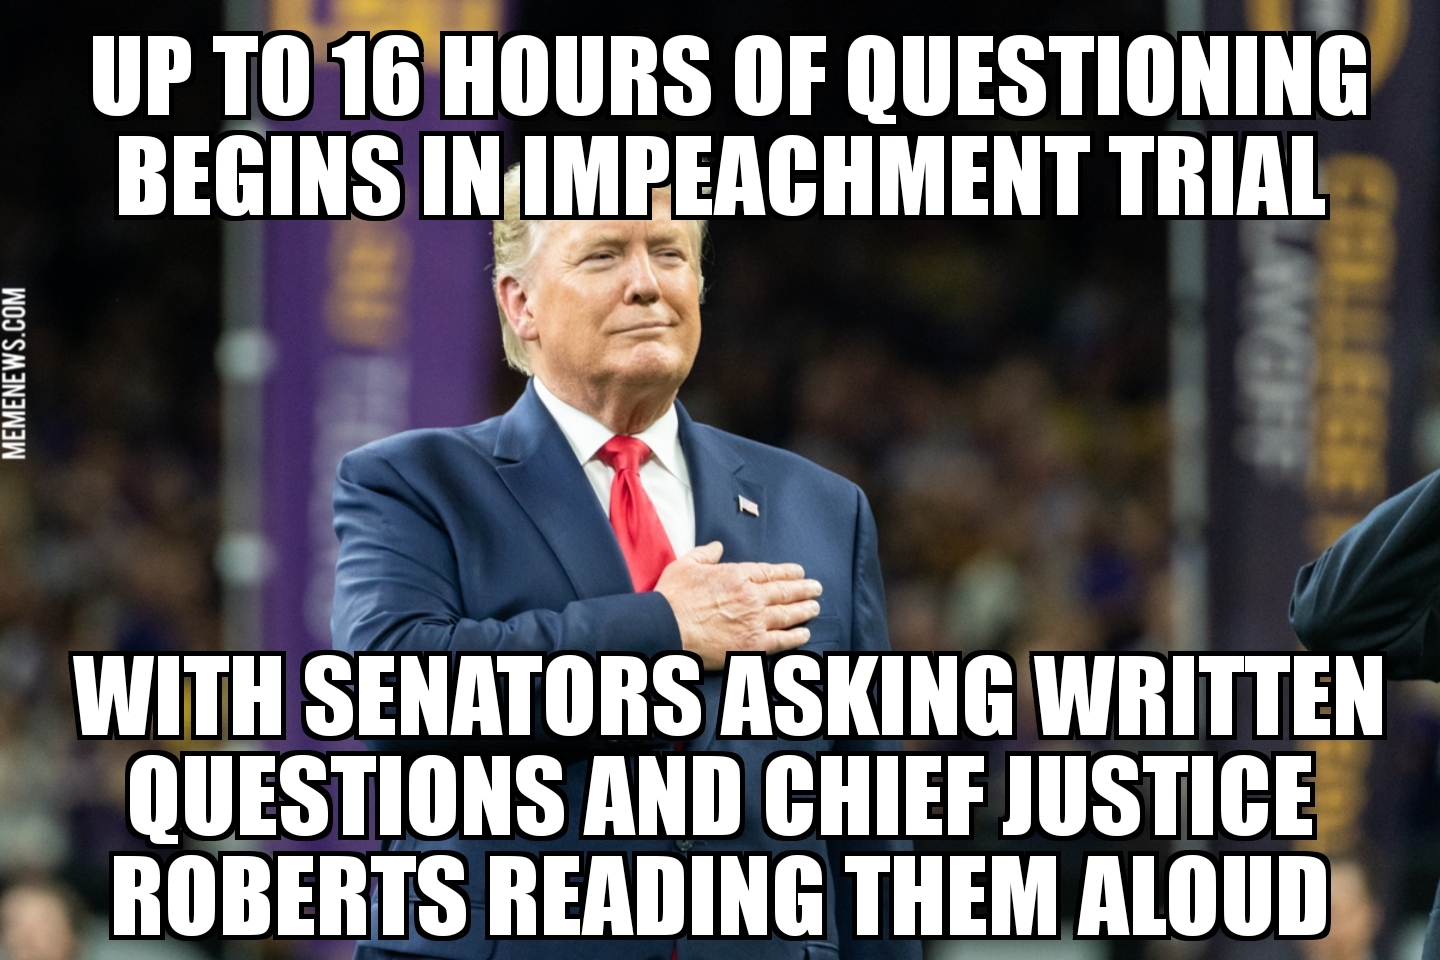 Questioning begins in Impeachment trial